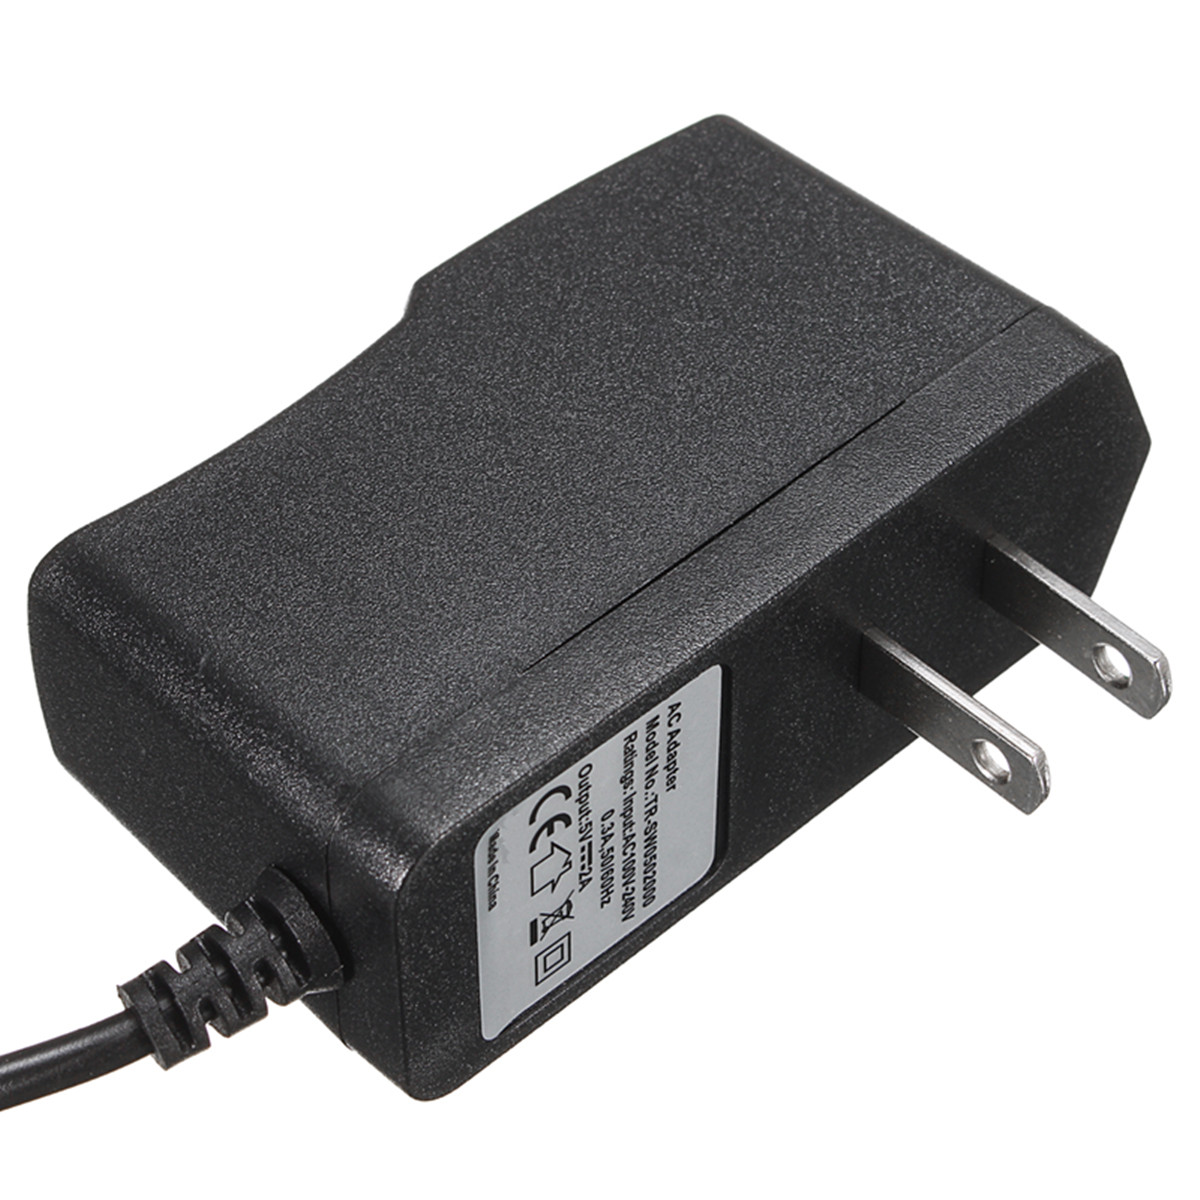 NES-Classic-Mini-AC-Charger-Adapter-for-Nintendo-Classic-Mini-Edition-Power-Supply-Charger-1363885-6